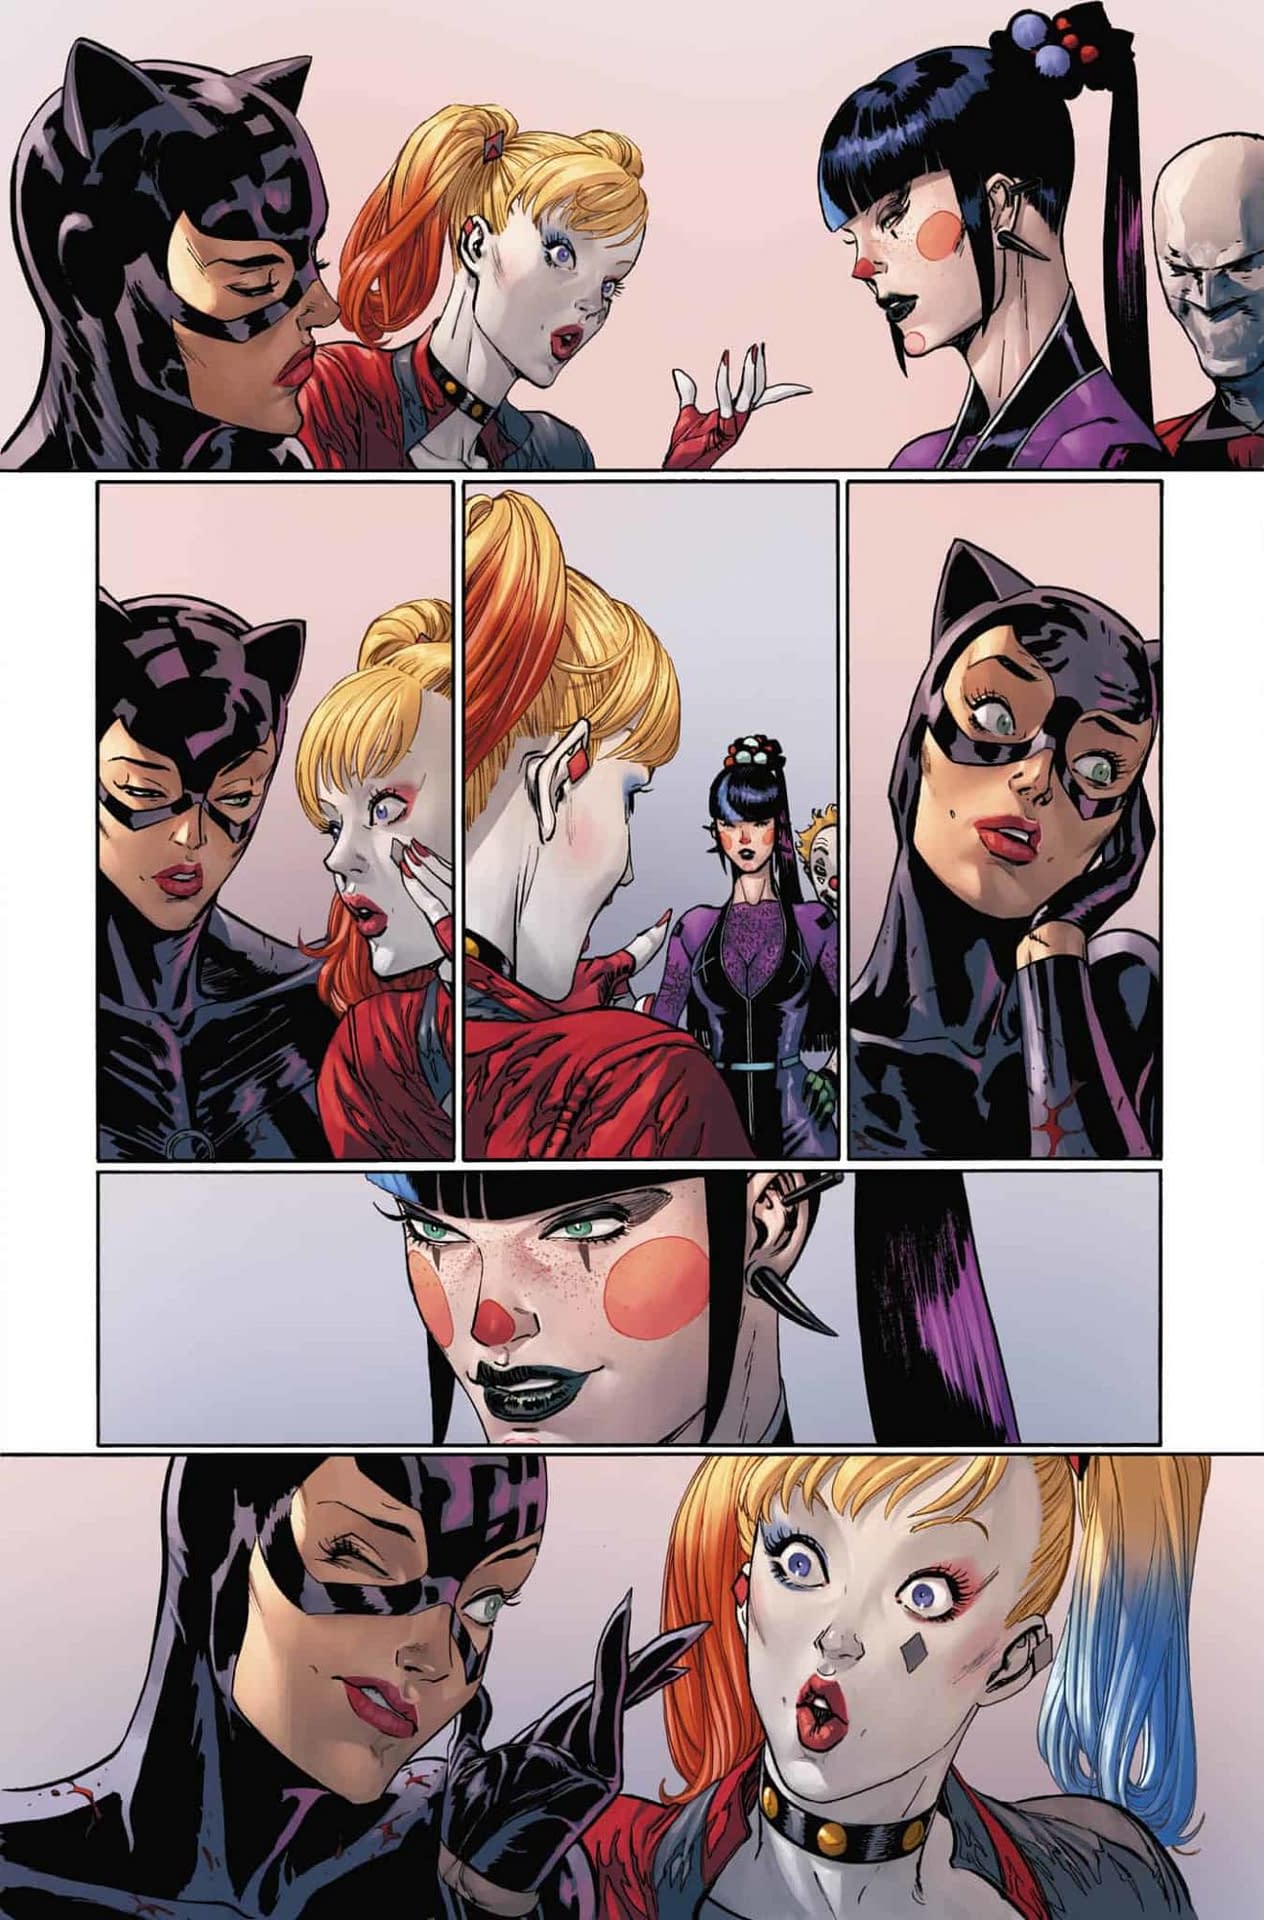 Batman #92, Punchline, Harley Quinn and Catwoman, interior page